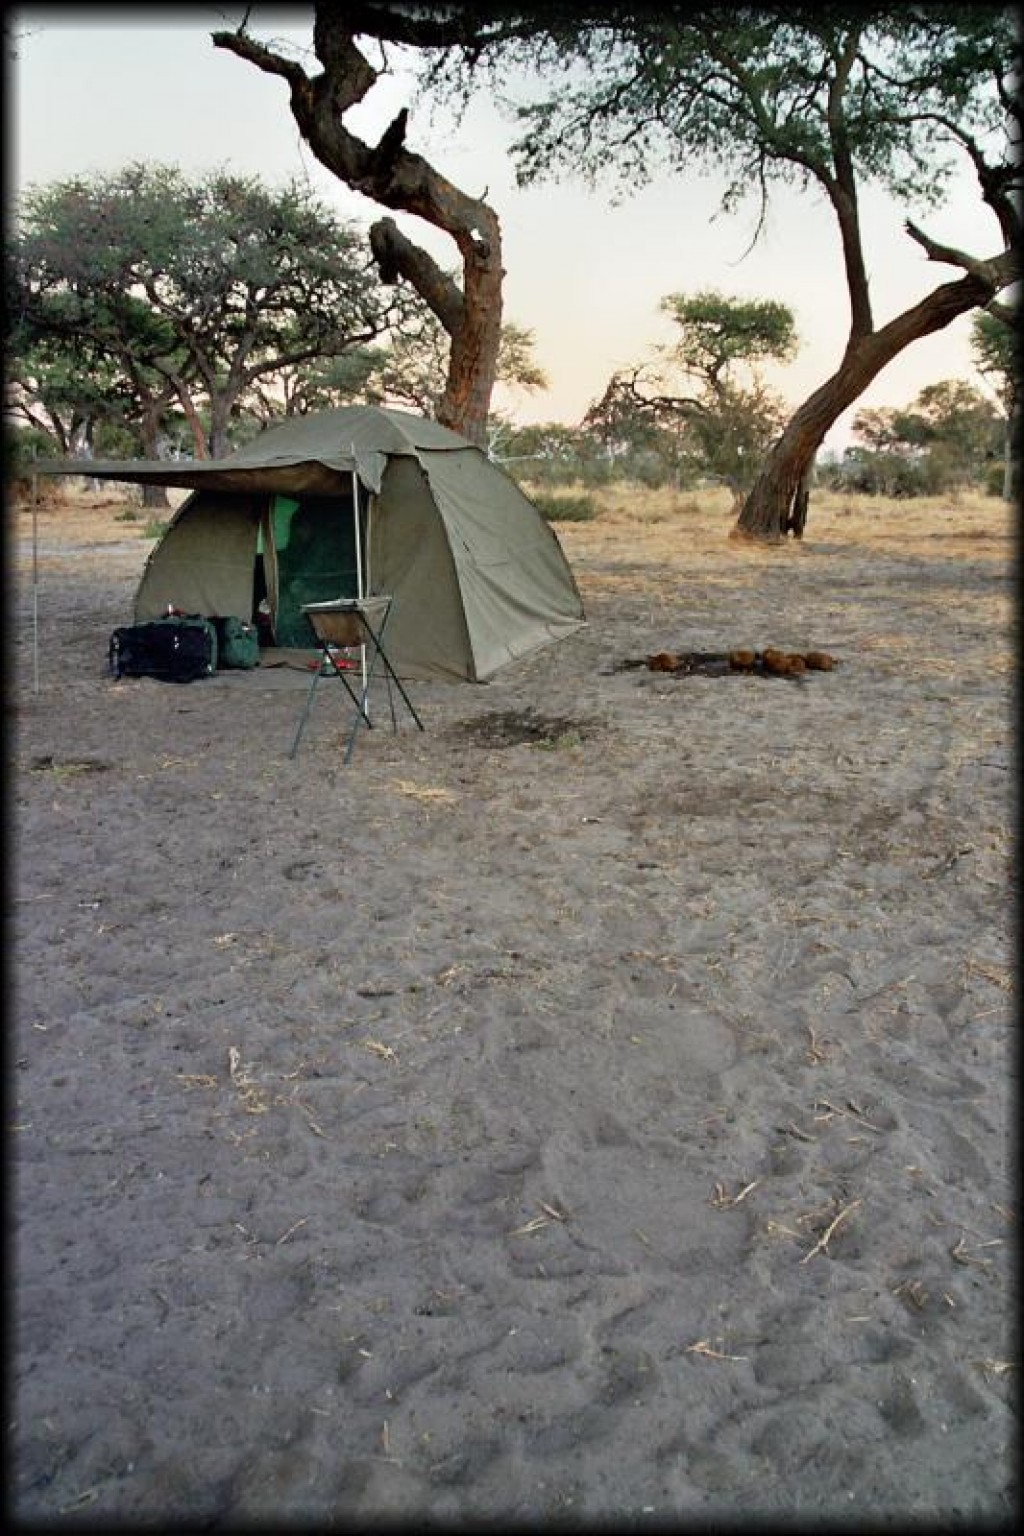 The night before we left the Khwai area, some elephants came to visit us in the middle of the night.  They woke us up as they shook the acacia tree we were camping under.  In the foreground, you can see the footprints of the elephant.  To the right of our tent, you see the deposit the elephant made during the night.